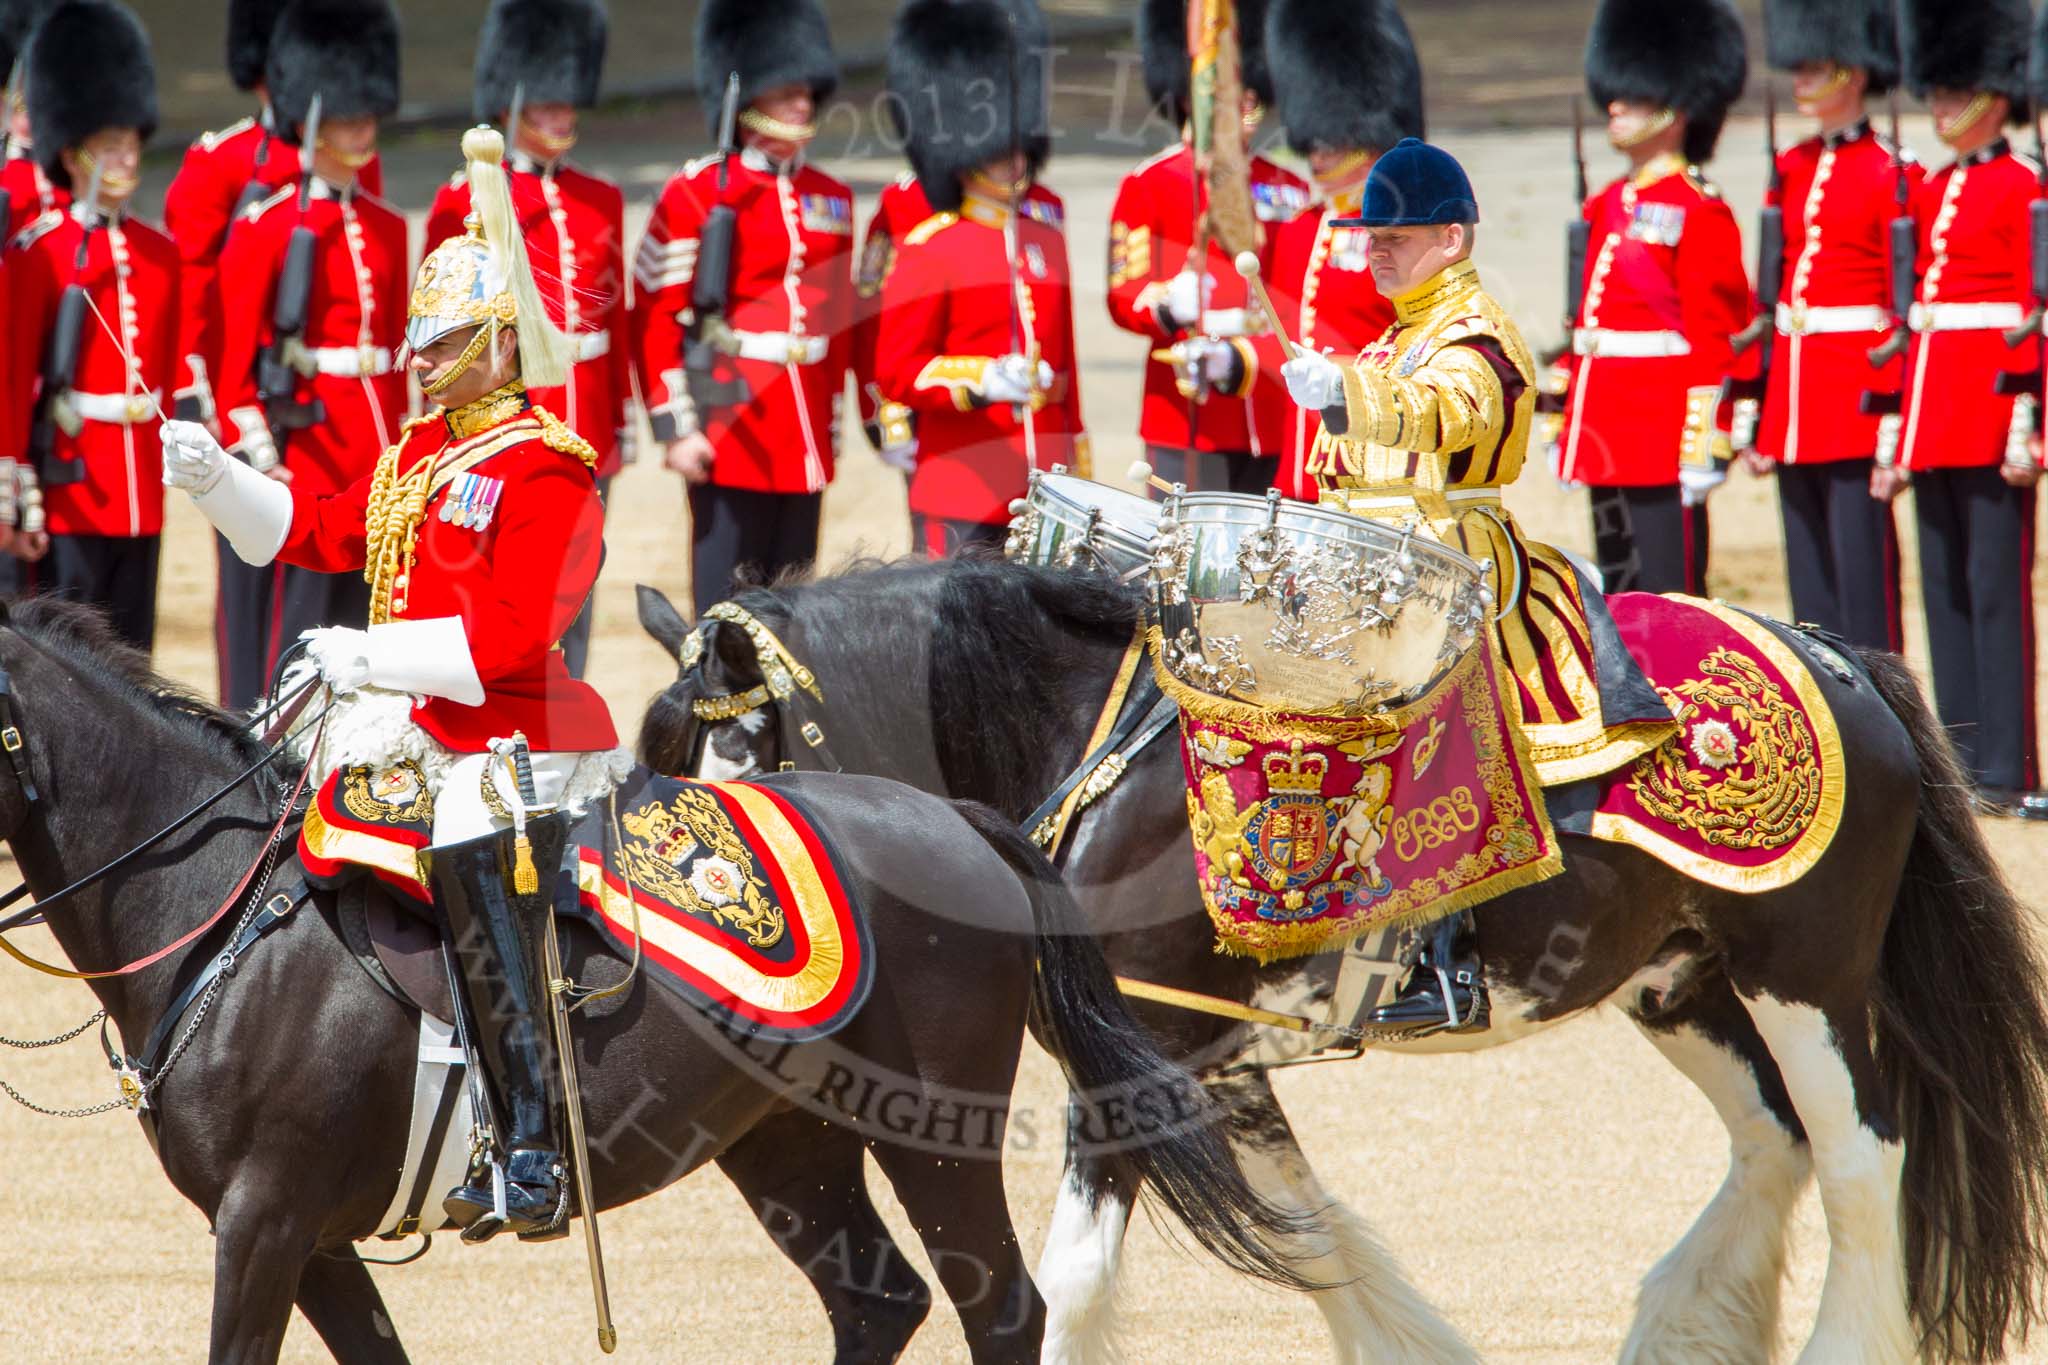 Trooping the Colour 2013: The Ride Past - the Mounted Bands of the Household Cavalry move, from the eastern side, onto Horse Guards Parade. The Director of Music of the Household Cavalry, Major Paul Wilman, The Life Guardsis followed by the kettle drummer from The Life Guards. Image #647, 15 June 2013 11:52 Horse Guards Parade, London, UK